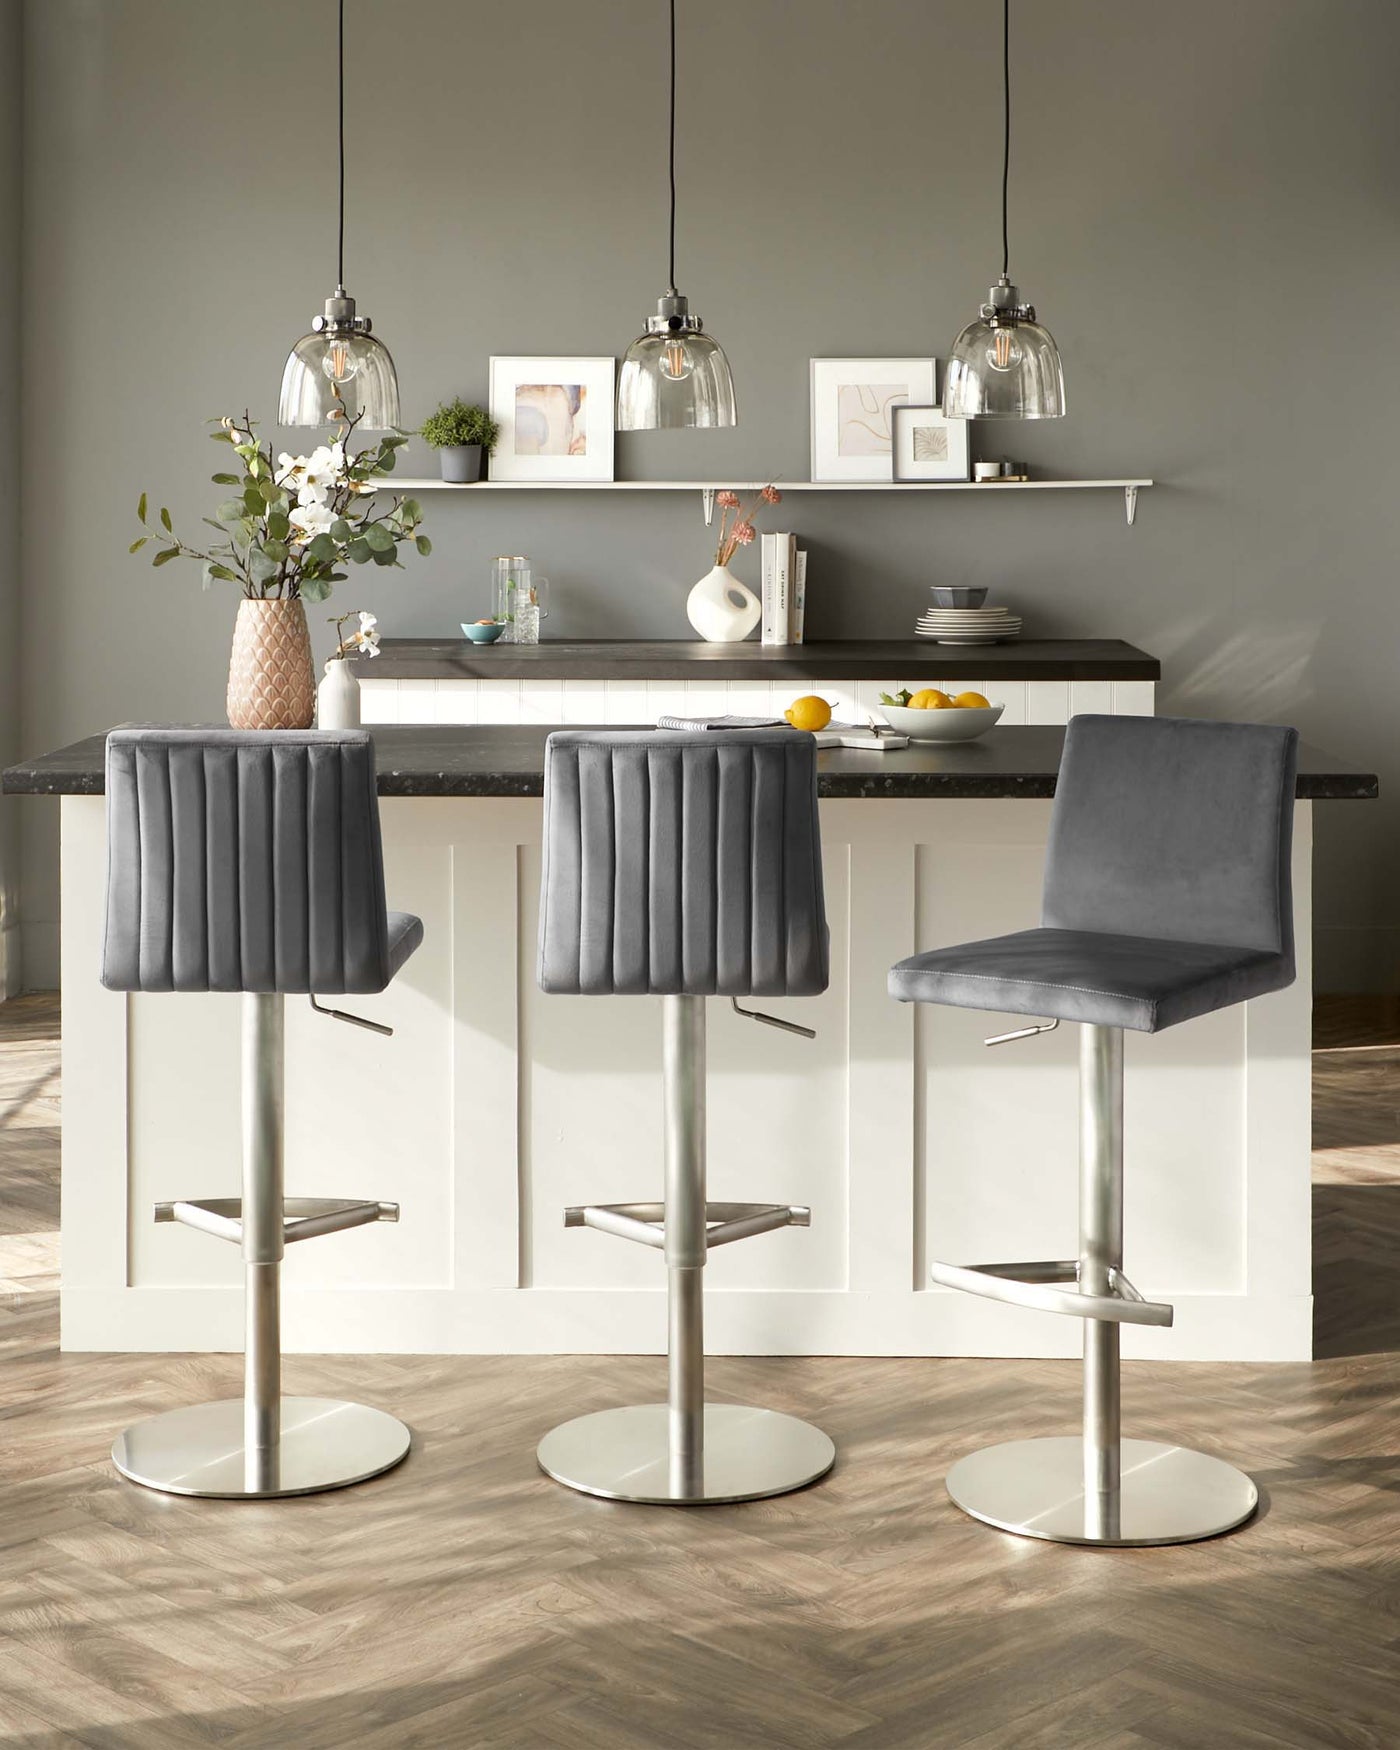 Three modern bar stools with sleek chrome pedestal bases, featuring adjustable height levers and built-in footrests. The seats are upholstered in a luxurious grey fabric with vertical stitching and plush cushioning, offering a comfortable and stylish seating option for a contemporary kitchen island.